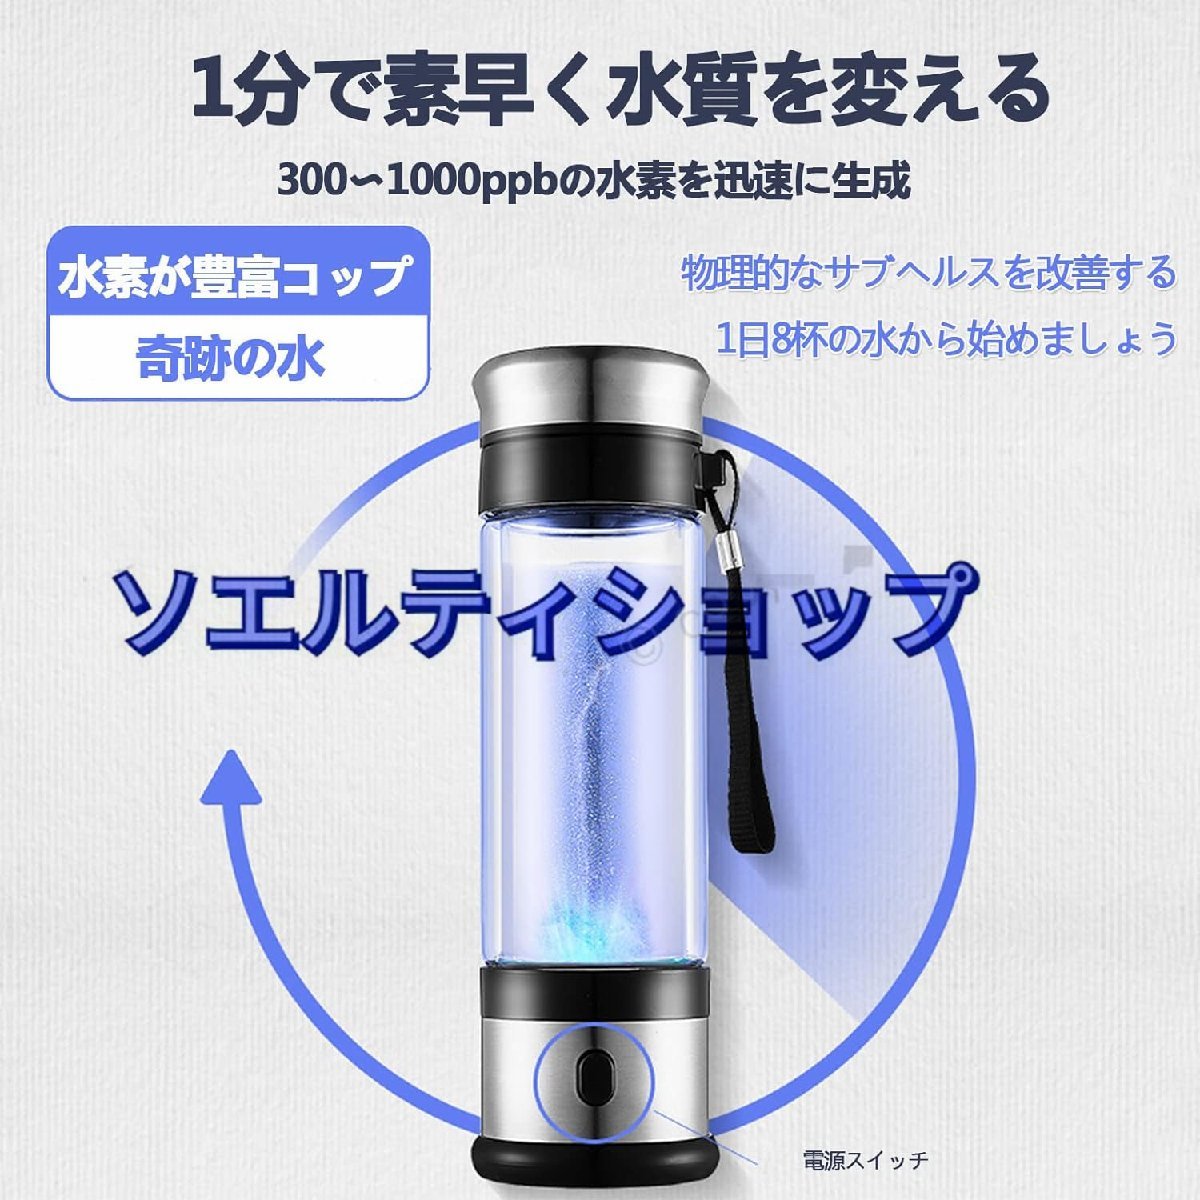  very popular * water element aquatic . vessel high density portable water element water bottle 3 minute raw .USB rechargeable 350ML electrolysis next . aquatic . vessel water element production. purity is 99%. beauty health 